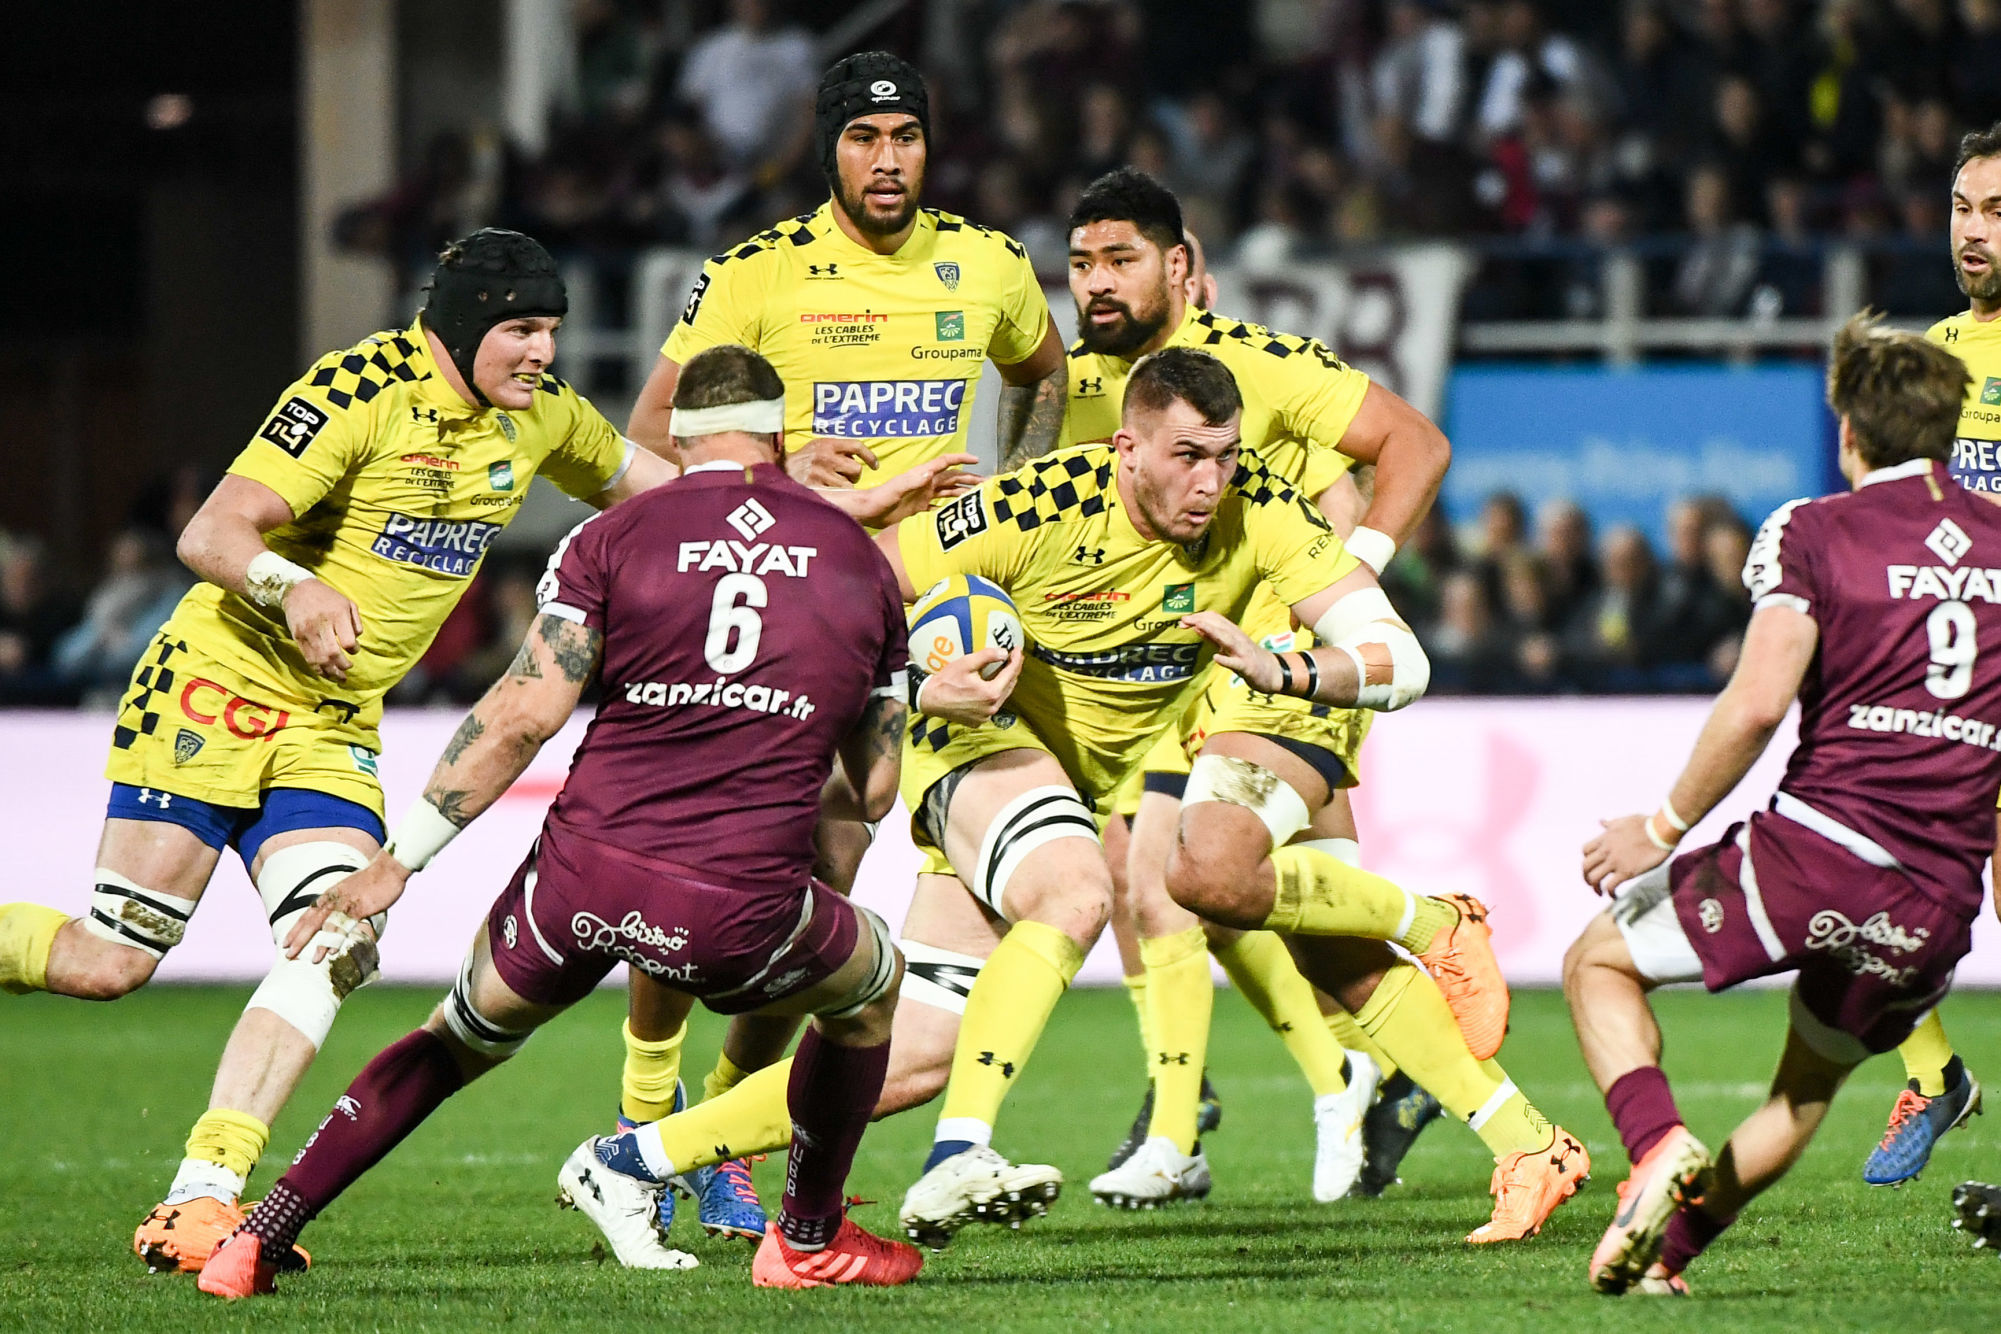 Paul JEDRASIAK of Clermont during the Top 14 match between Clermont and Bordeaux on February 22, 2020 in Clermont-Ferrand, France. (Photo by Anthony Dibon/Icon Sport) - Paul JEDRASIAK - Stade Marcel Michelin - Clermont Ferrand (France)